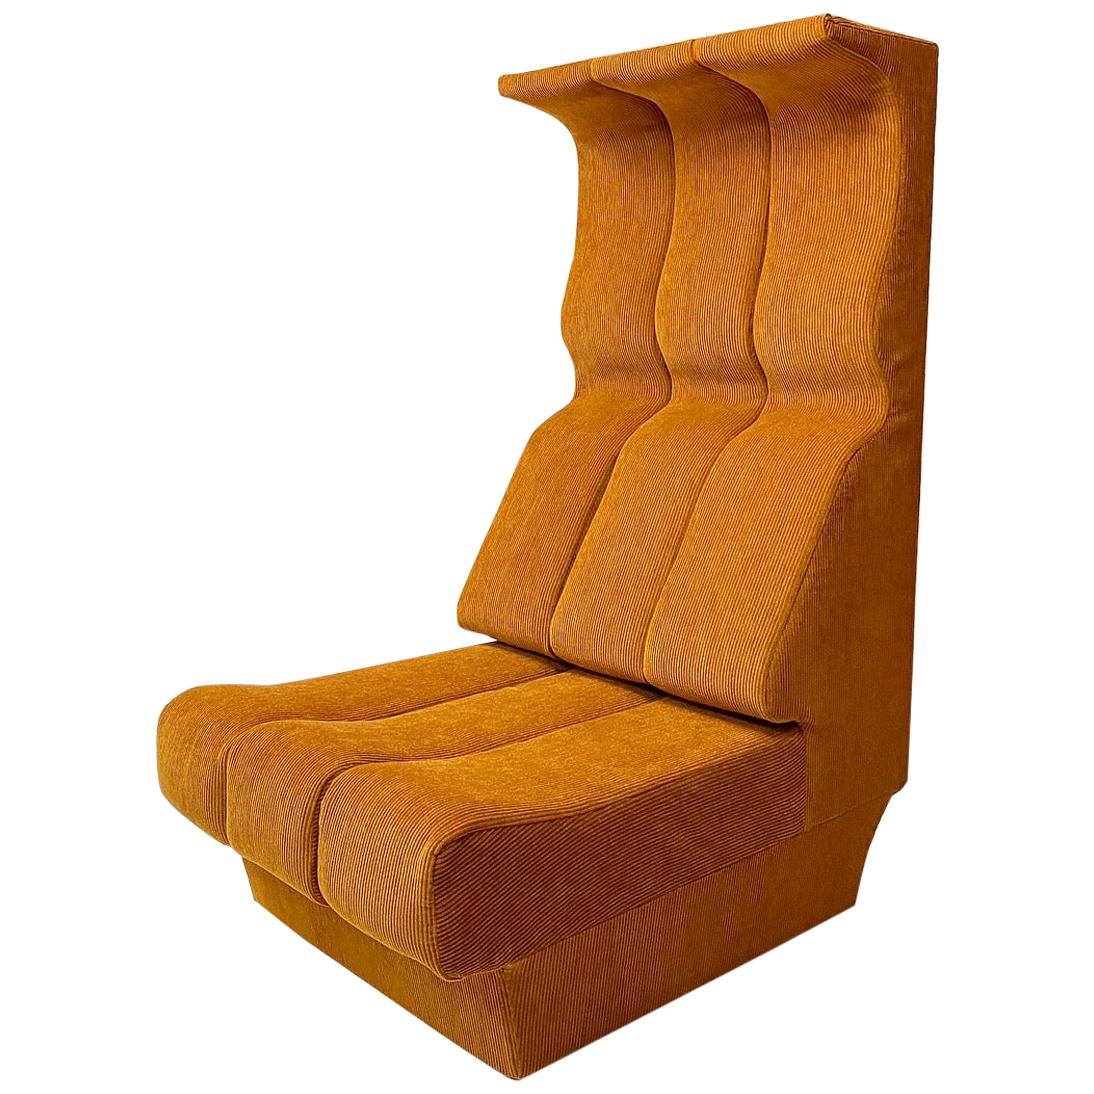 Interlübke Highback Space Age Seat with New Upholstery, Germany, 1970 For Sale